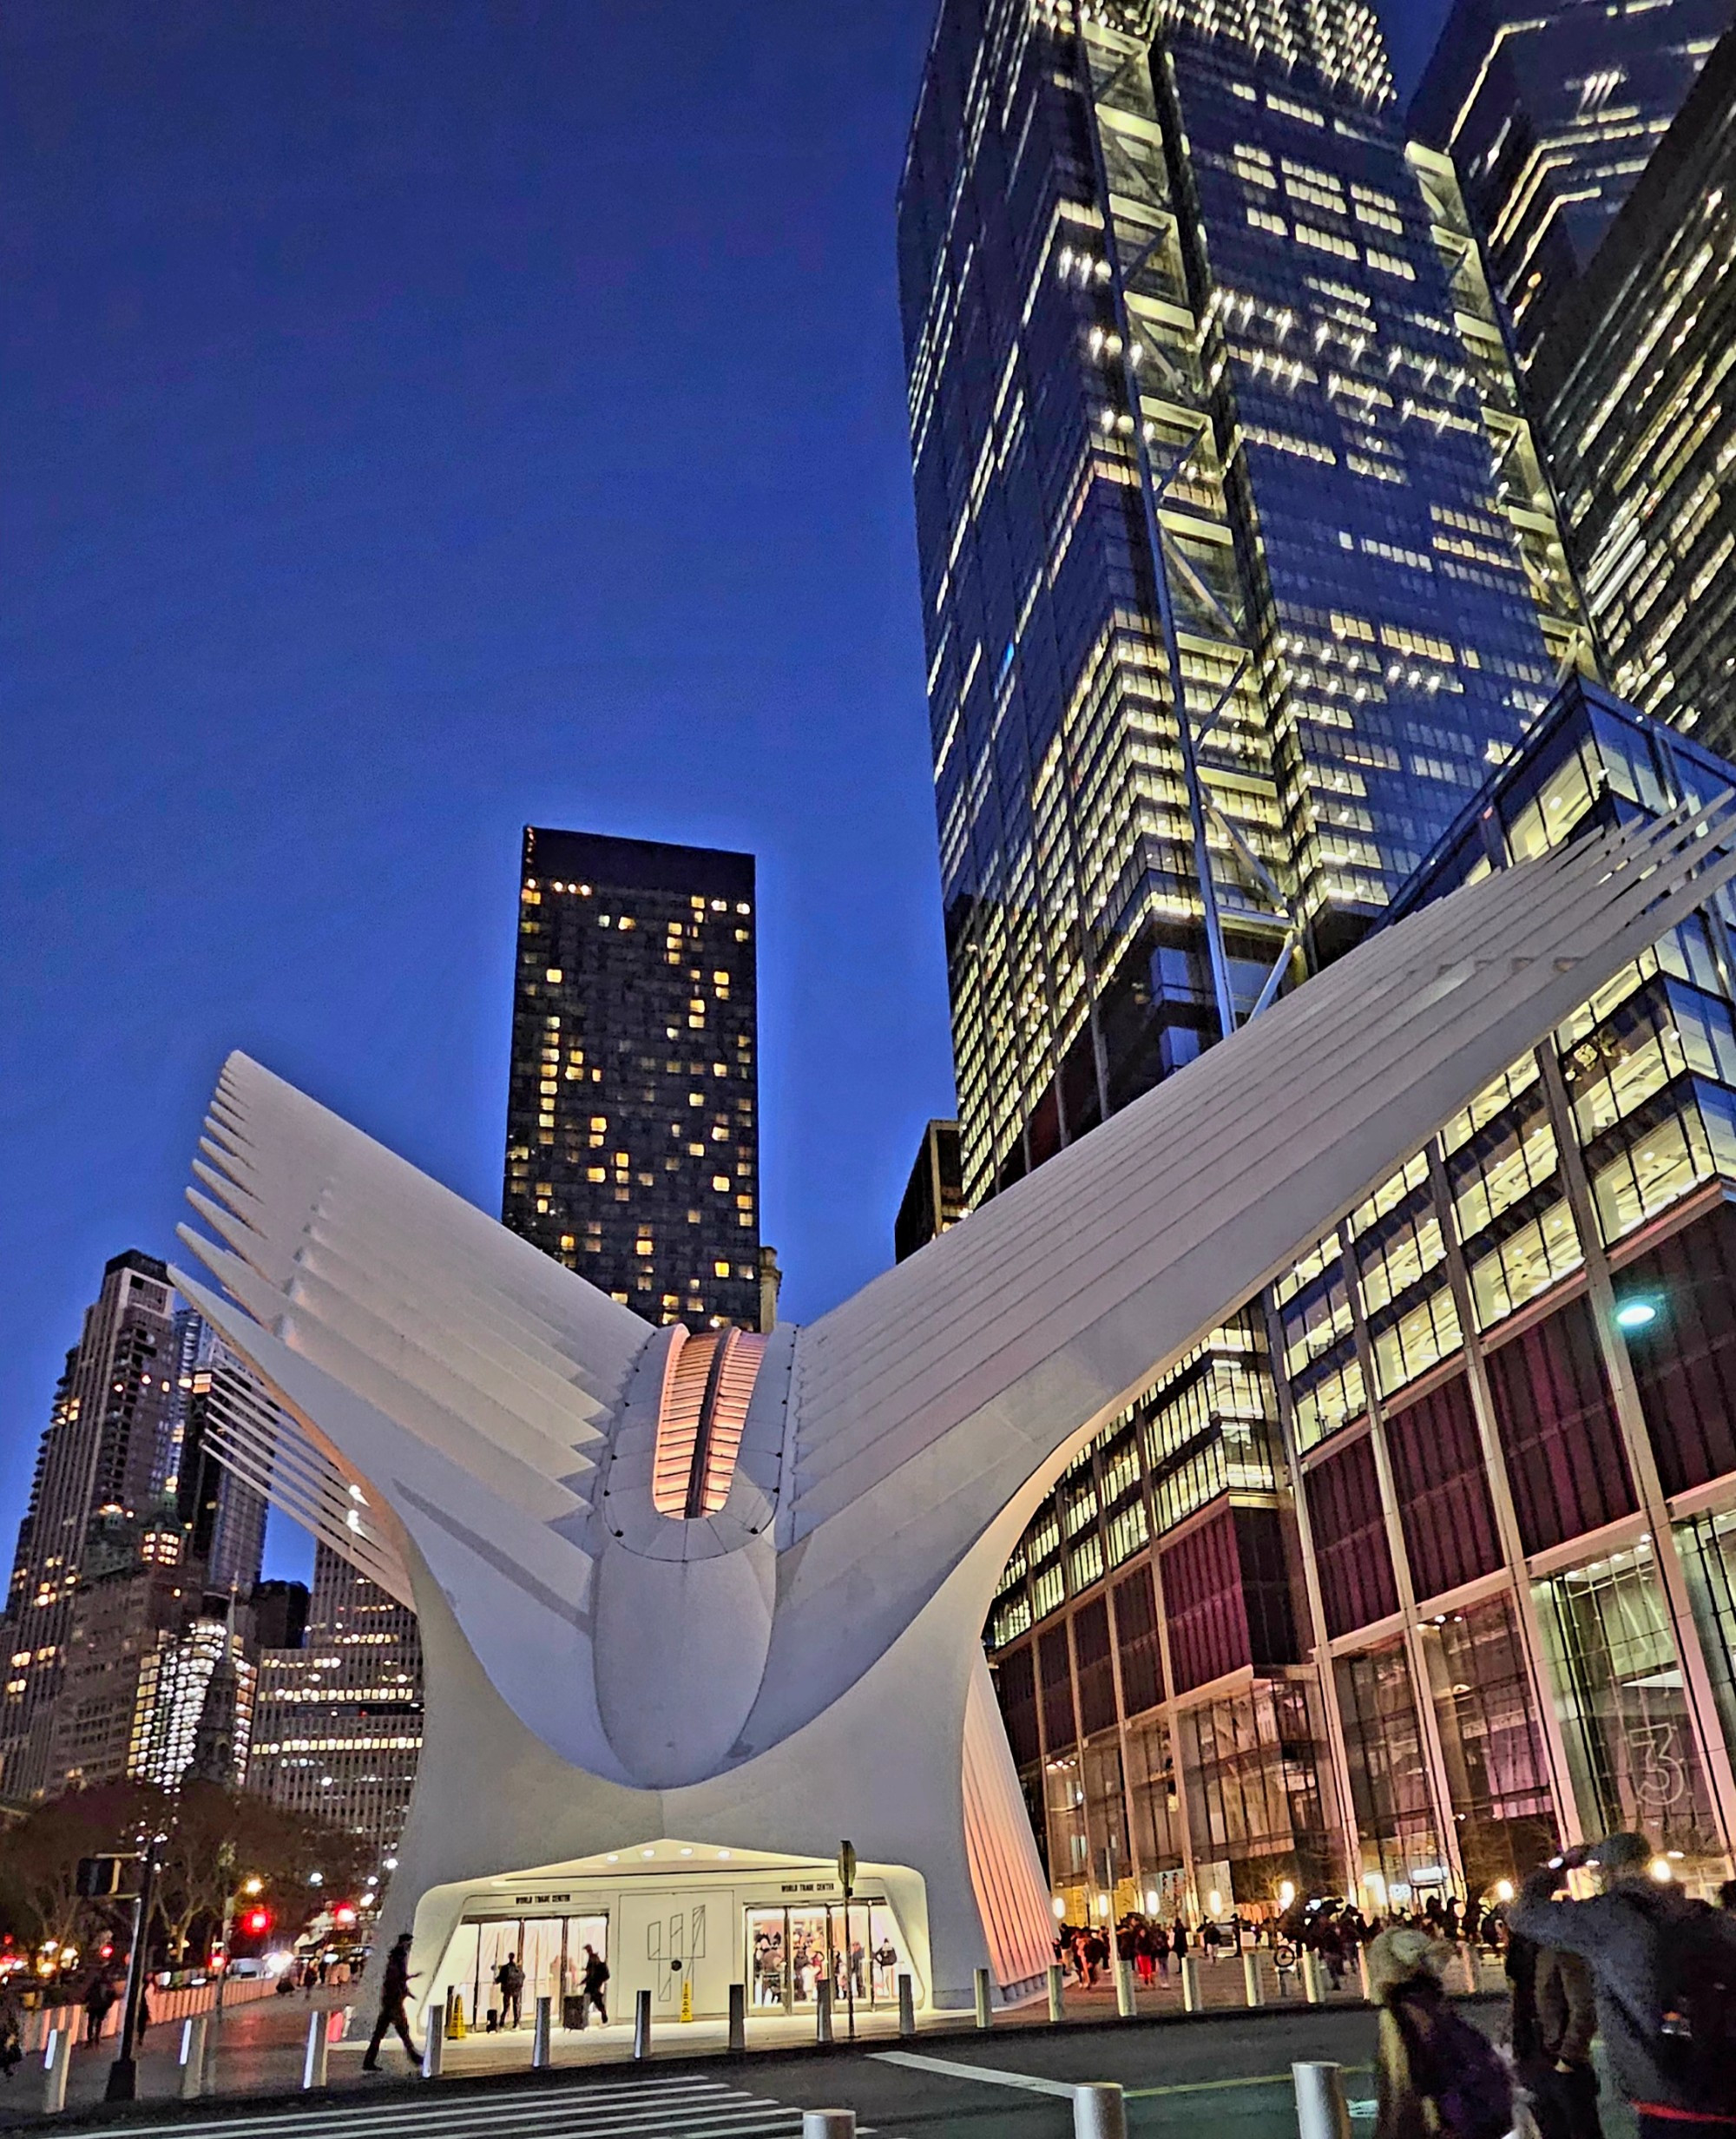 The Oculus Center in NYC